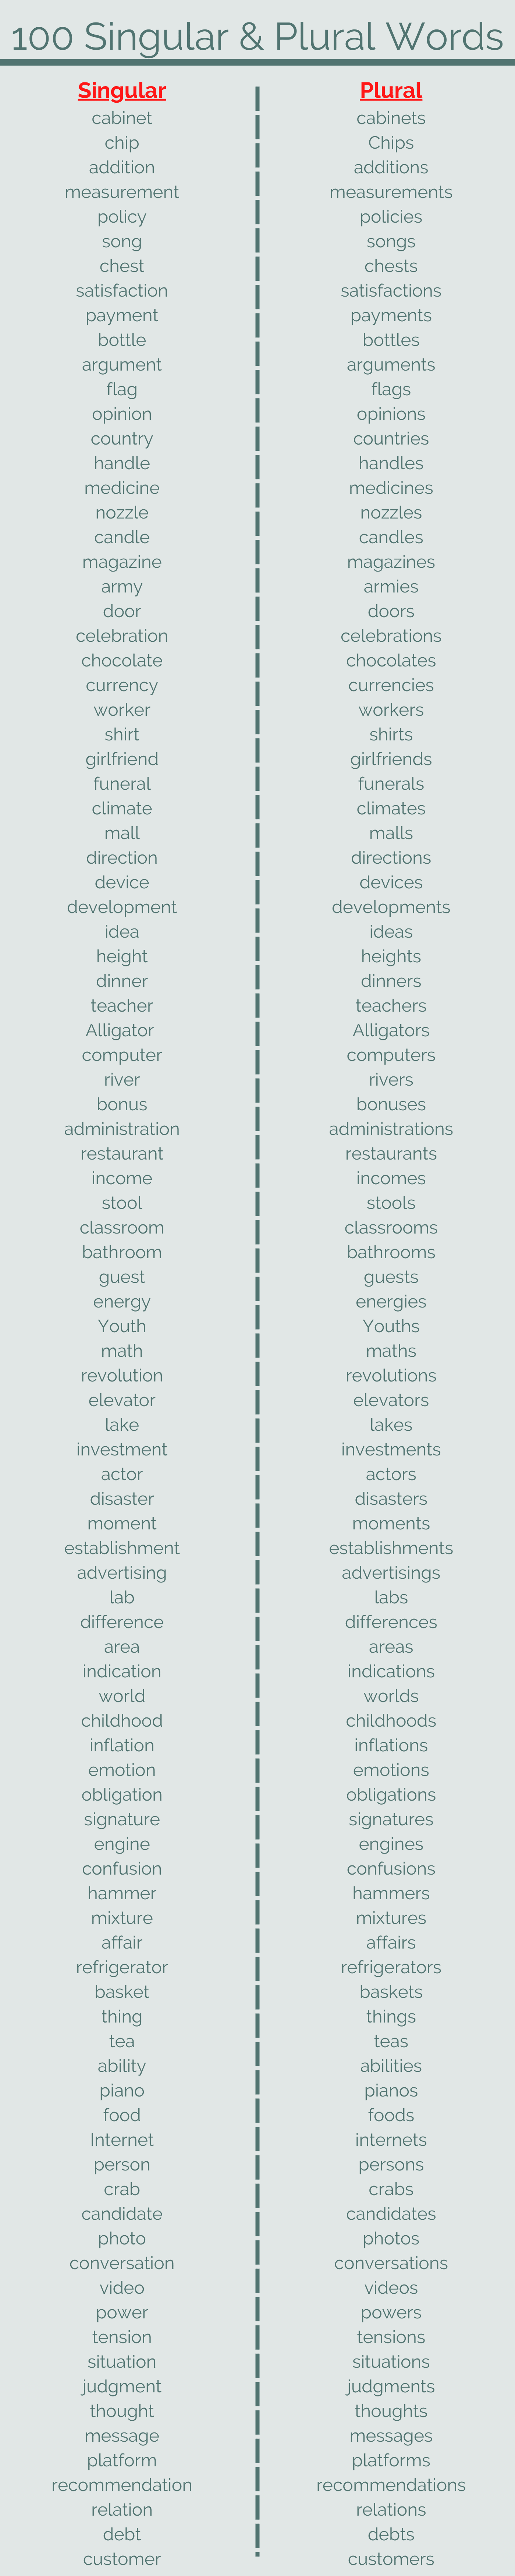 List of 100 Singular and Plural words in the English Language.